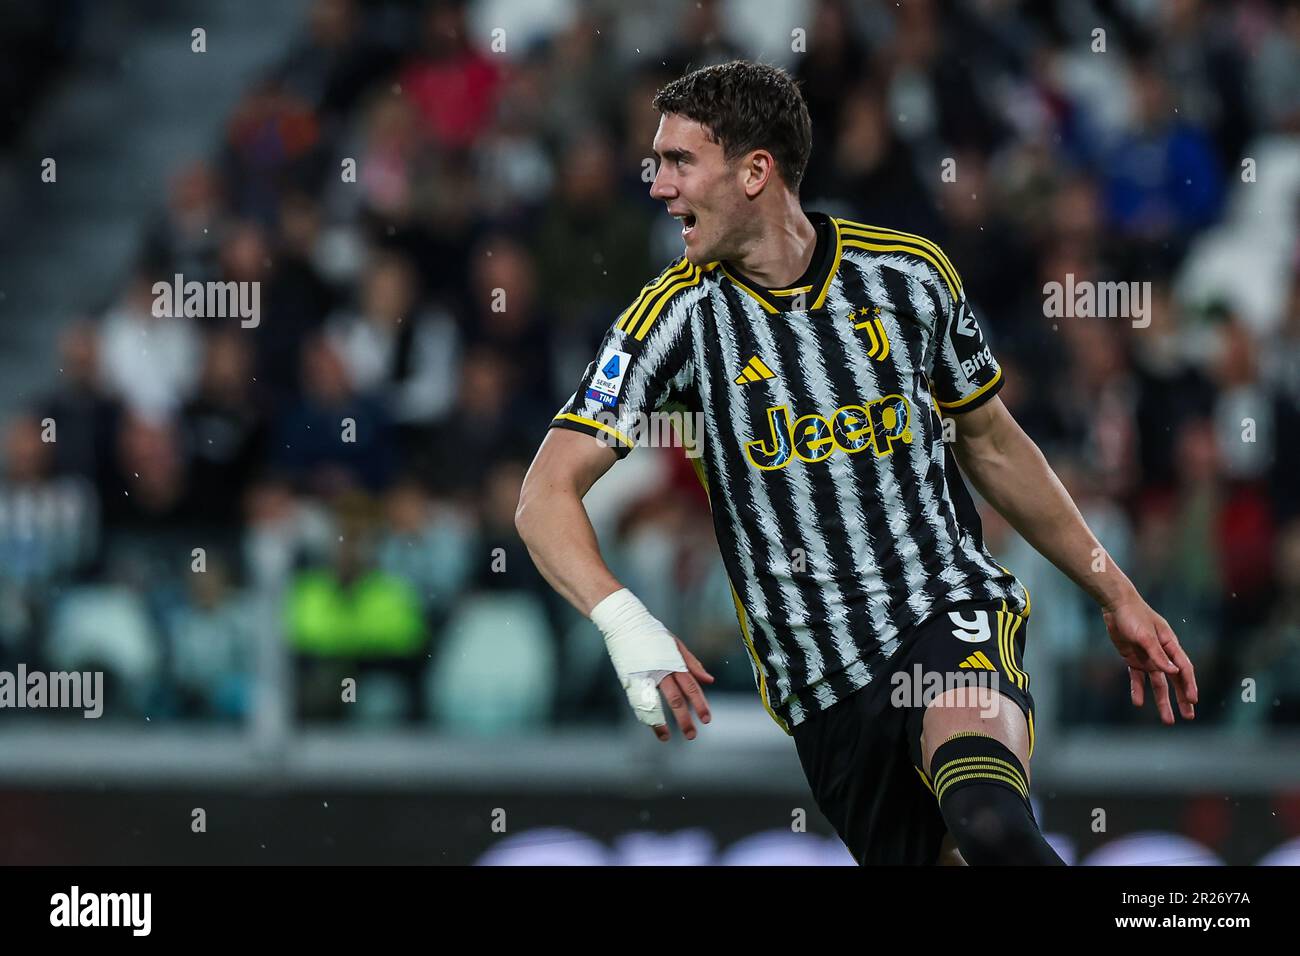 Turin, Italy. 14th May, 2023. Dusan Vlahovic of Juventus FC wearing the new  jersey Home Kit 23/24 during the Serie A 2022/23 football match between  Juventus FC and US Cremonese at the